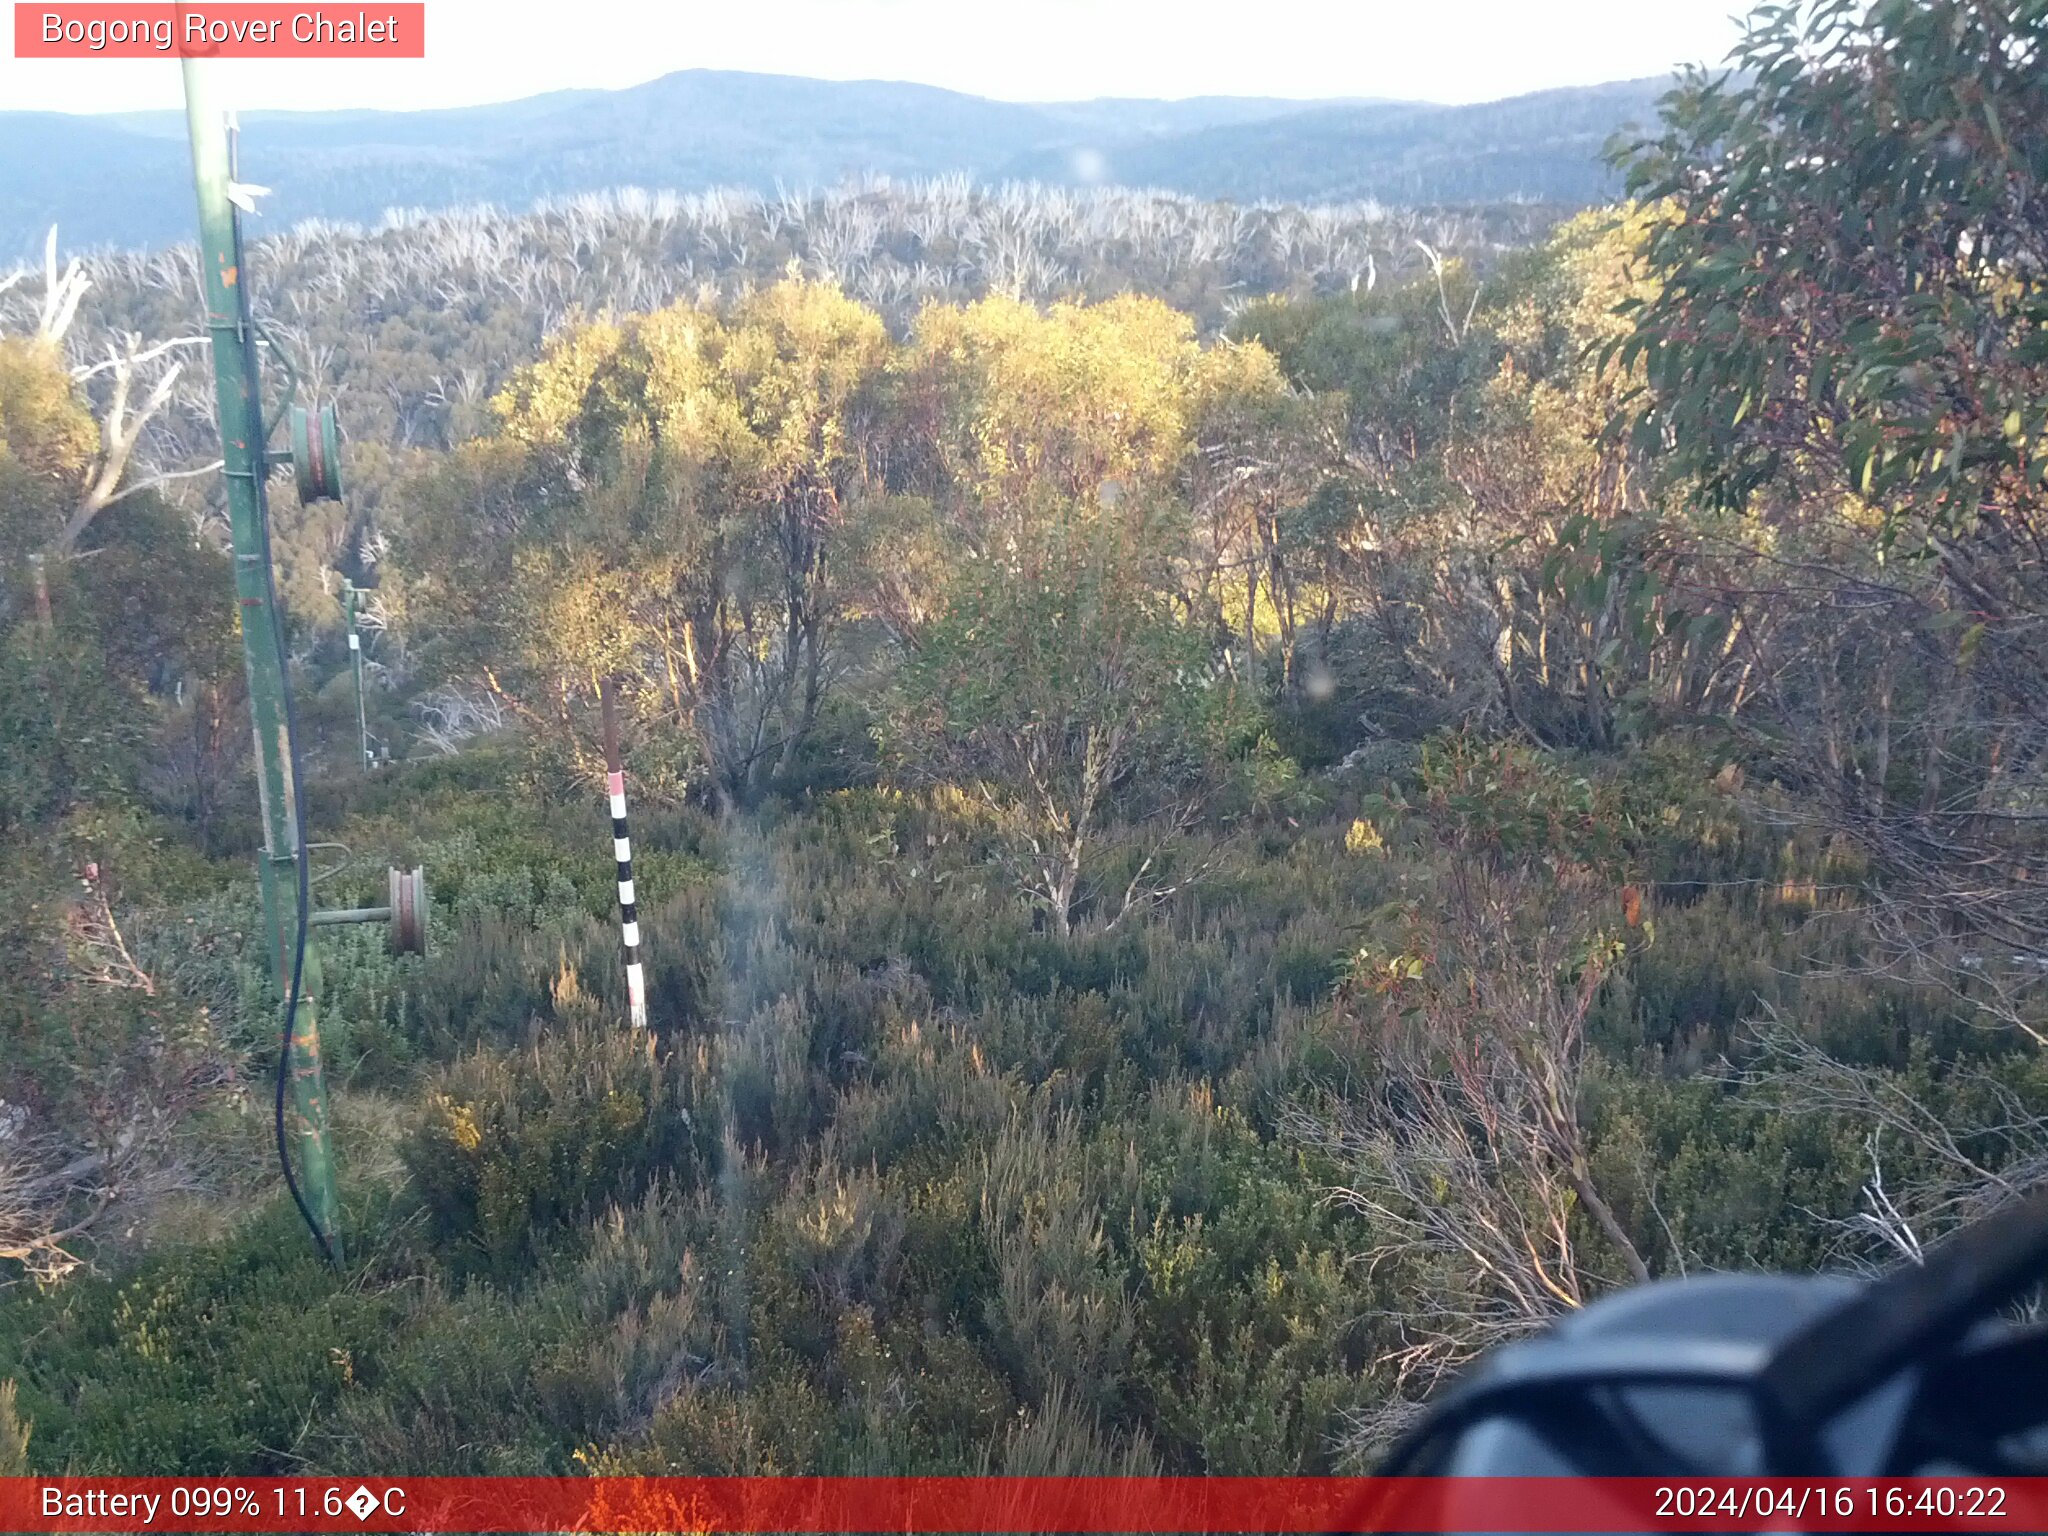 Bogong Web Cam 4:40pm Tuesday 16th of April 2024